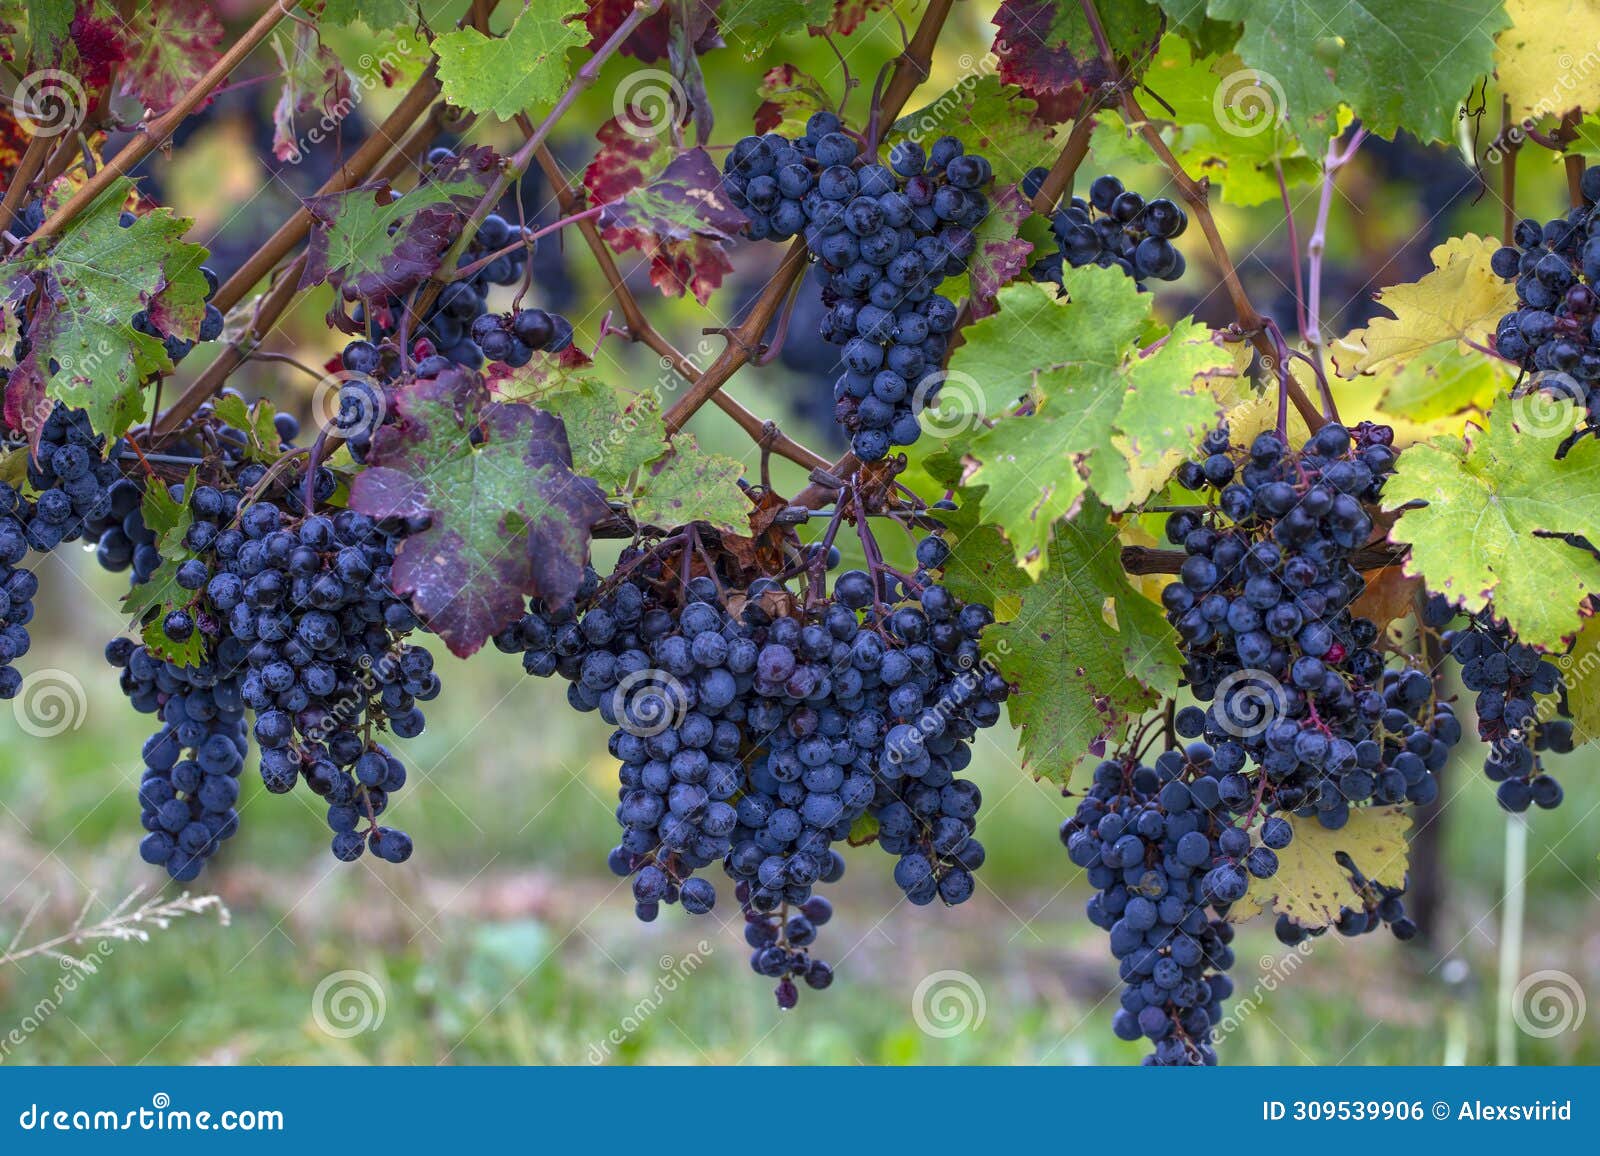 a blue grape hanging in a vineyard.